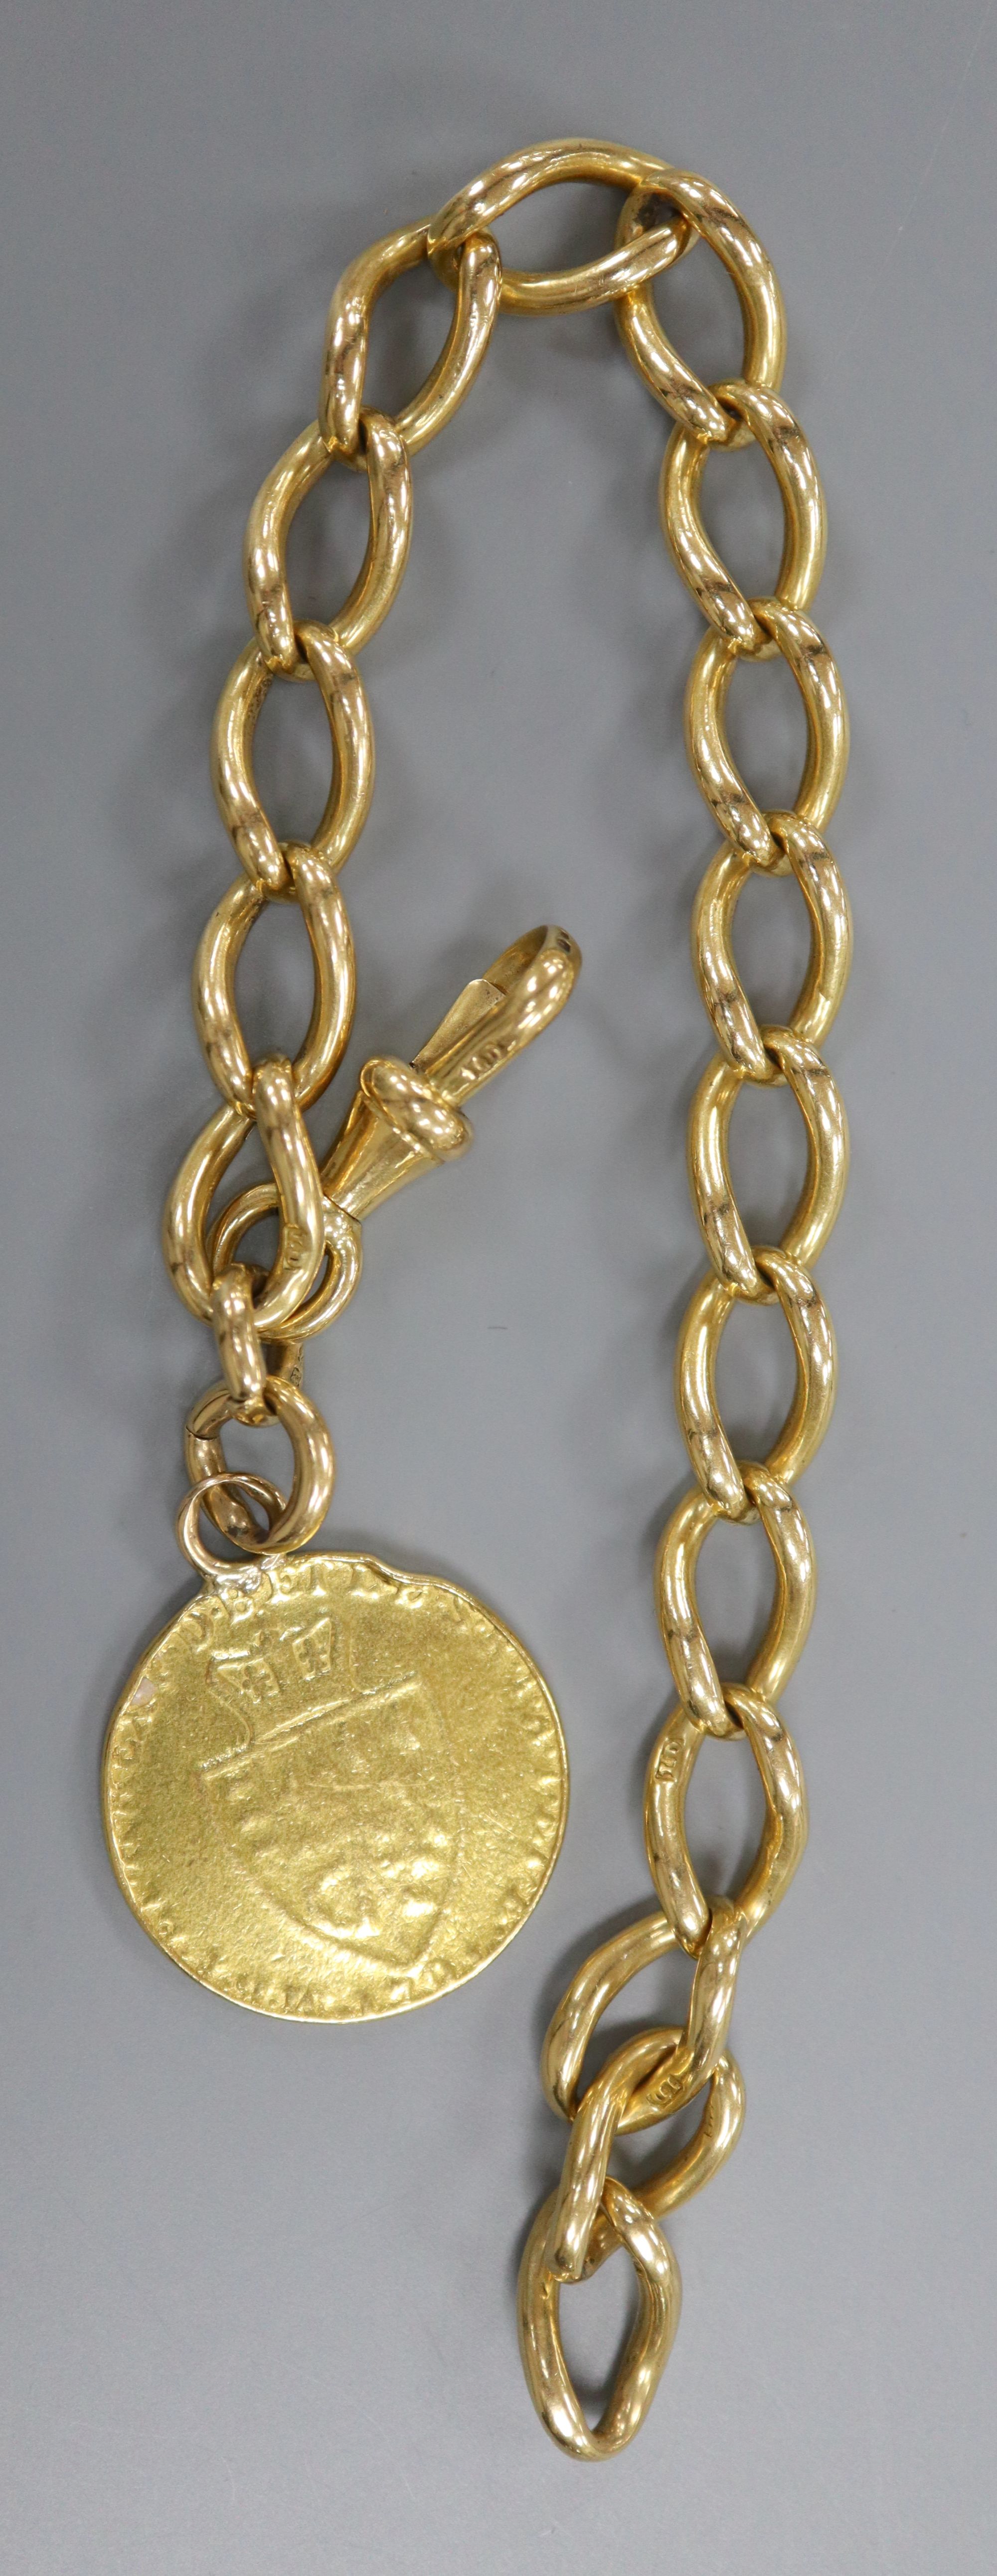 An 18ct gold curb link bracelet hung with a mounted spade guinea, bracelet 21.5cm,